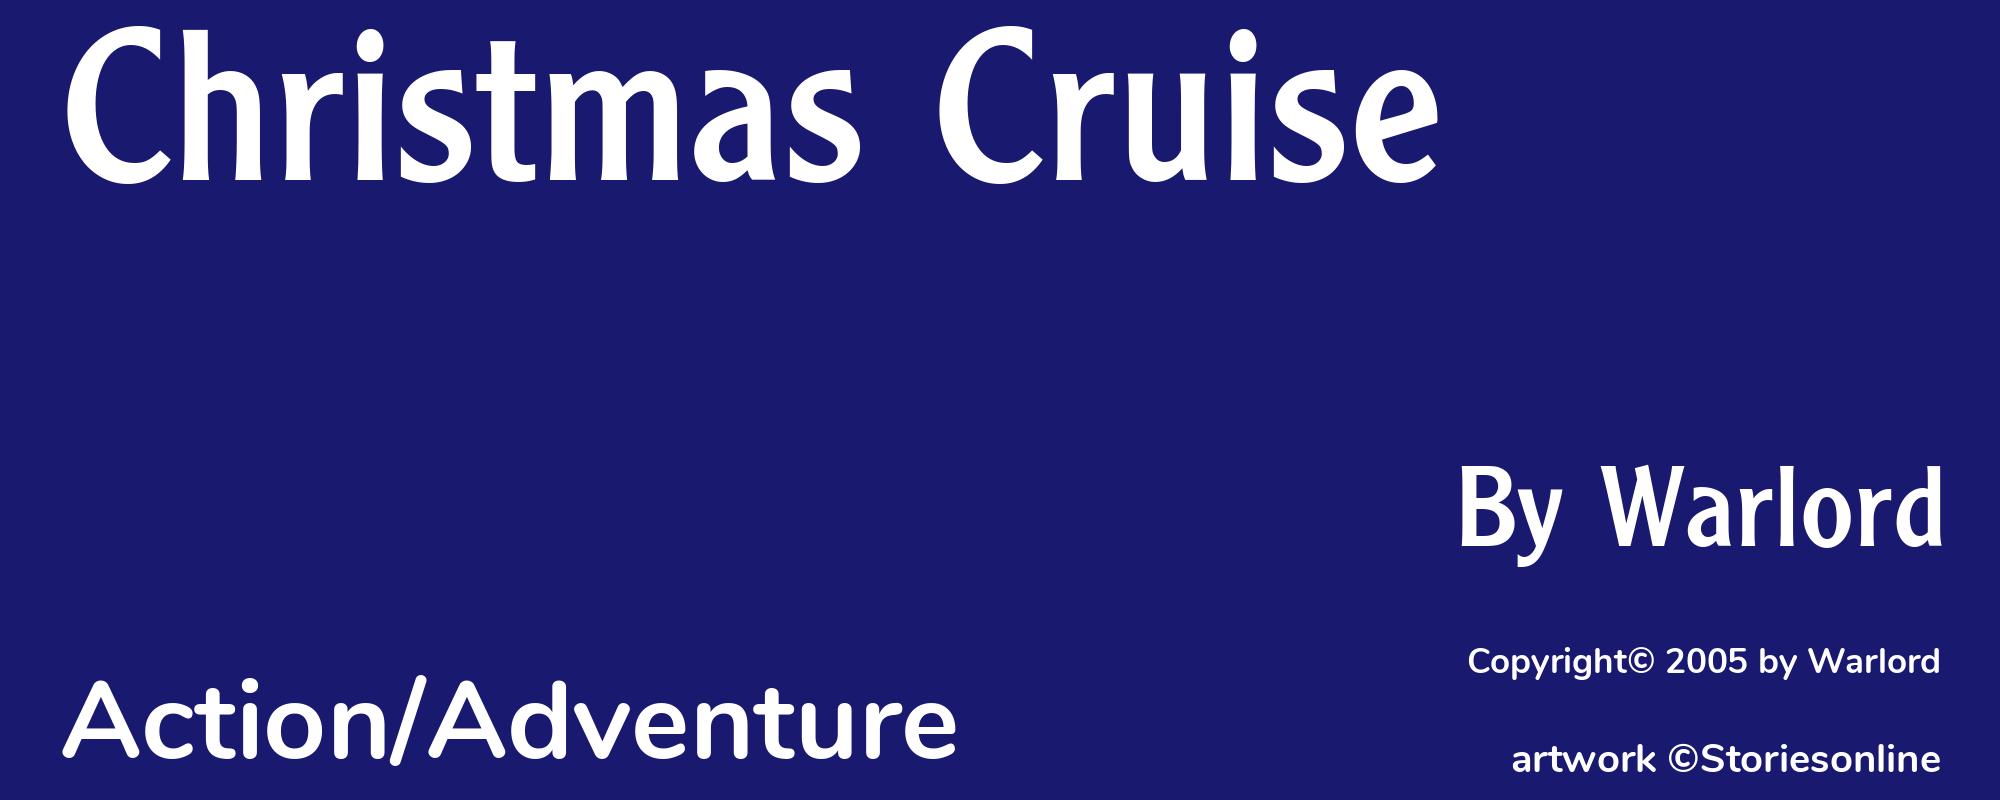 Christmas Cruise - Cover